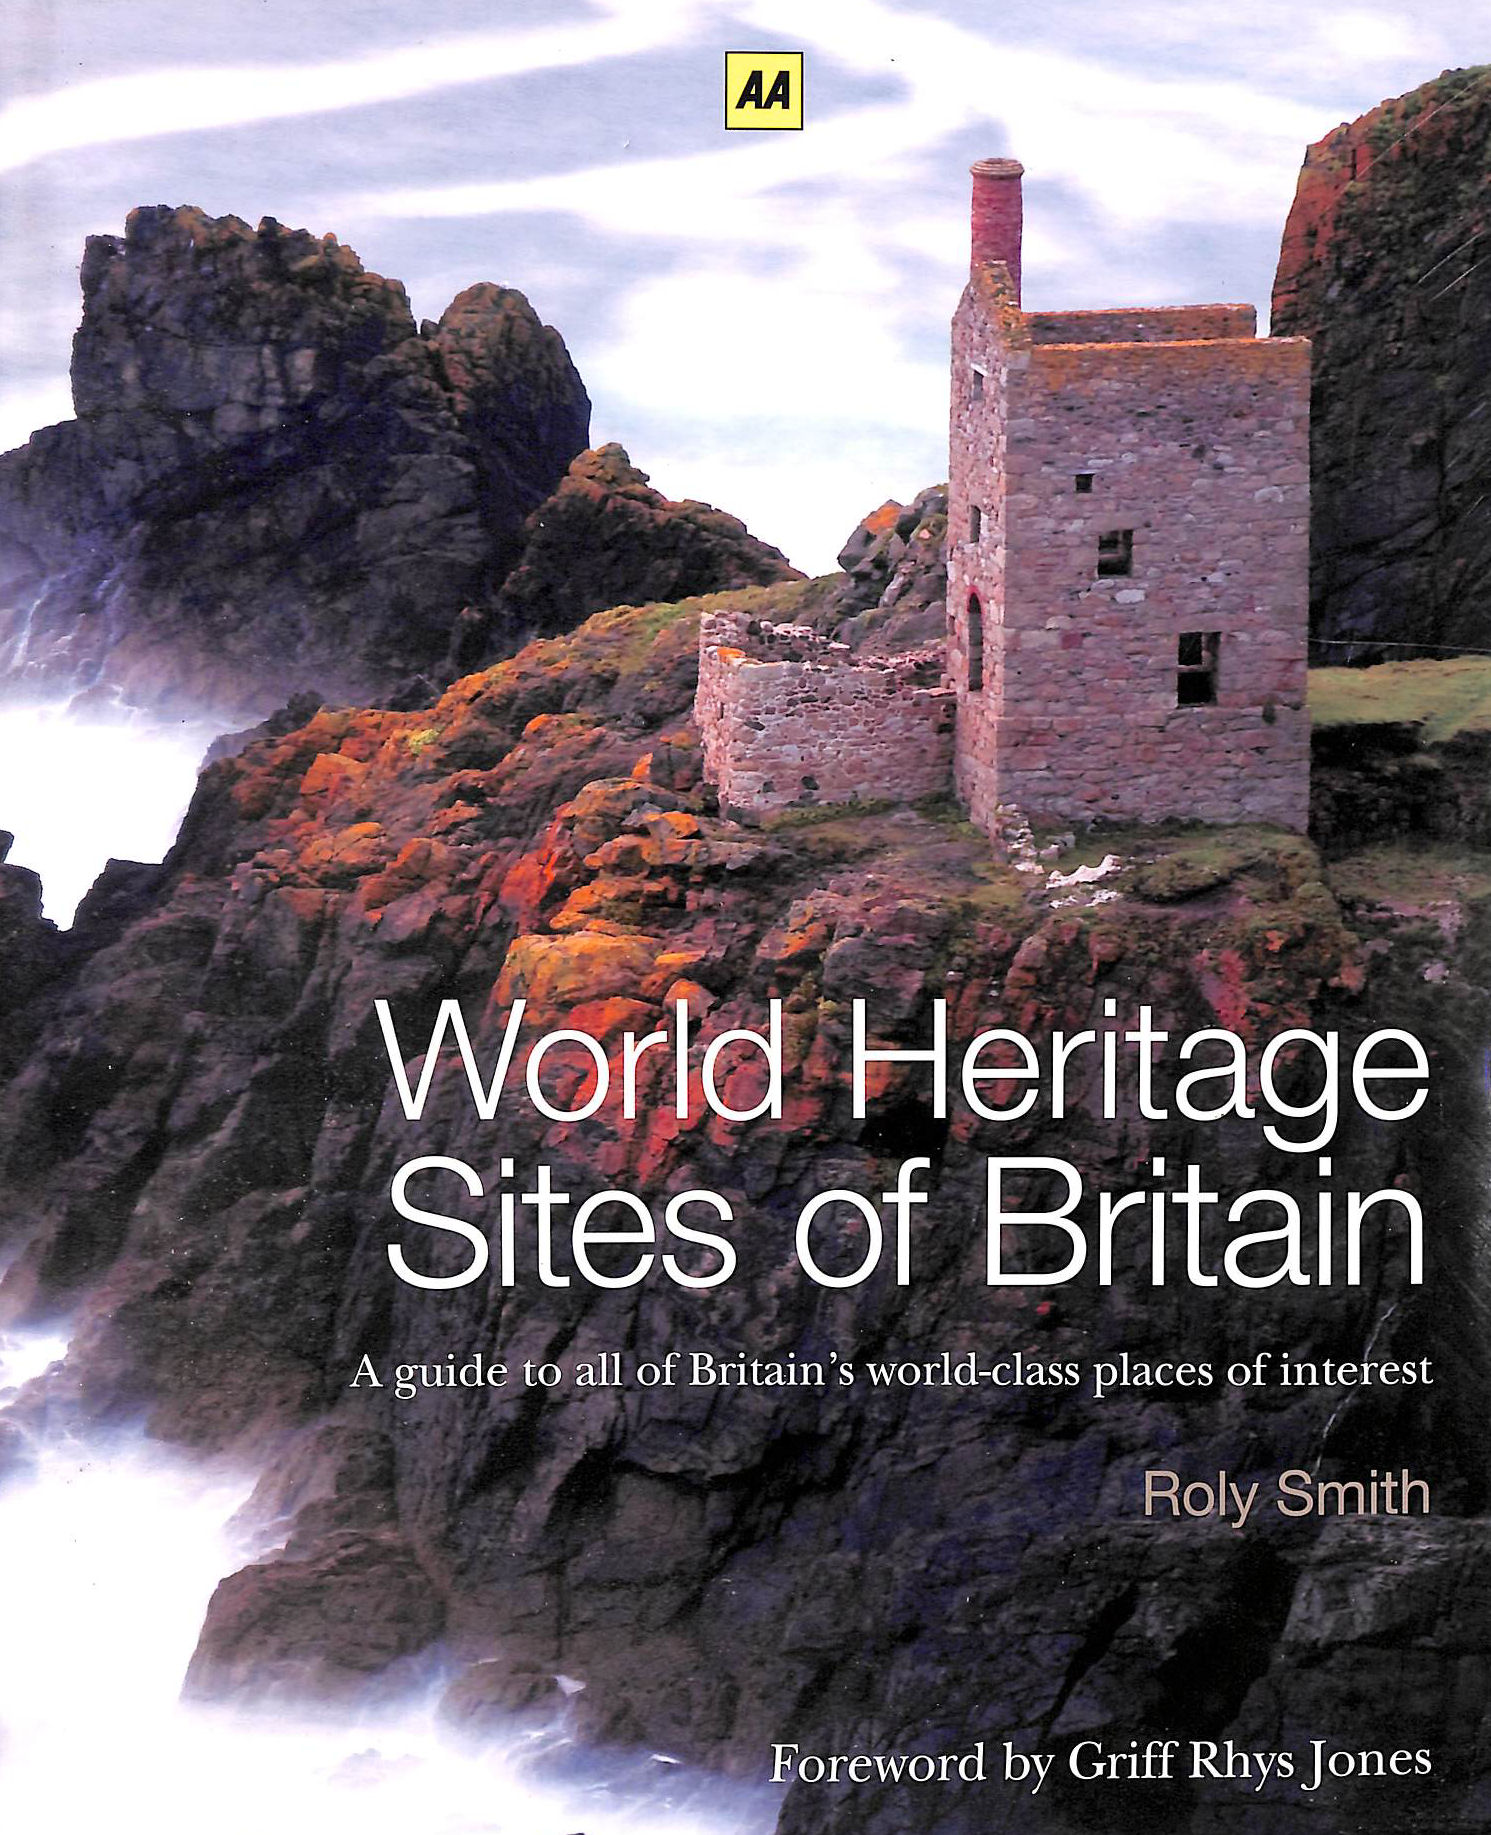 ROLY SMITH; GRIFF RHYS JONES [FOREWORD] - World Heritage Sites of Britain (AA Illustrated Reference)